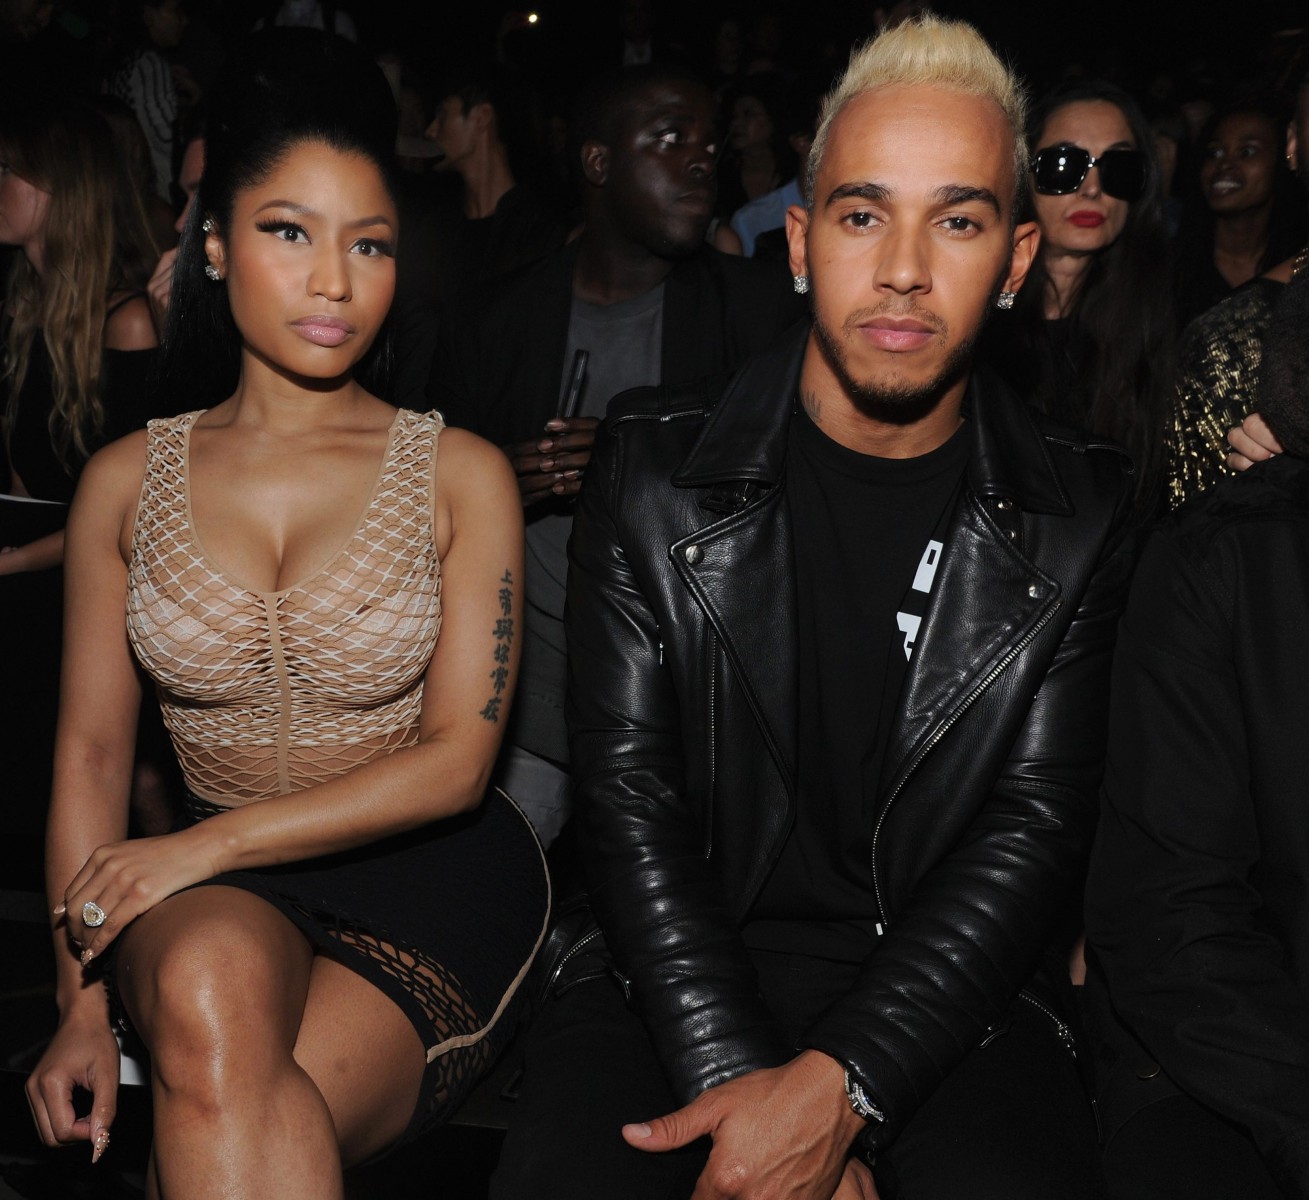 Nicki Minaj and Hamilton have kept us guessing on their relationship status for years